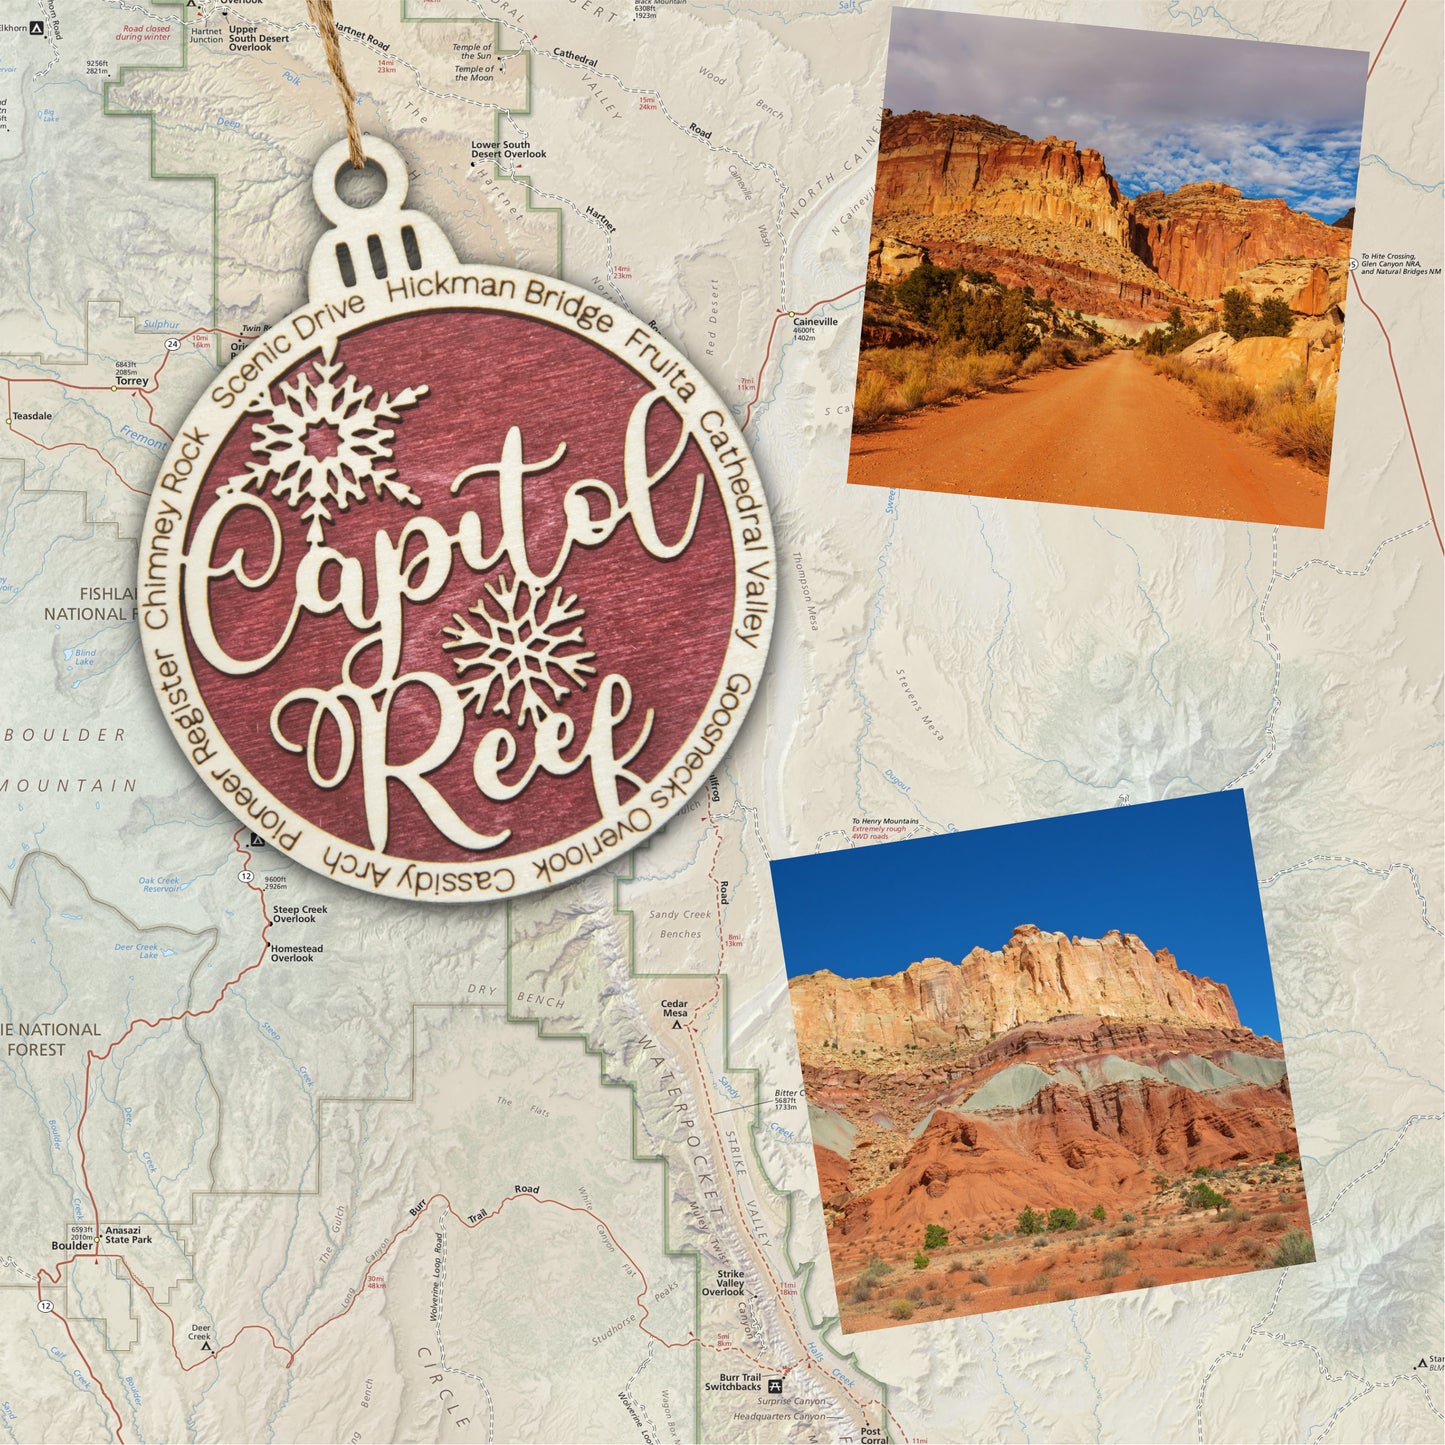 Capitol Reef National Park Christmas Ornament